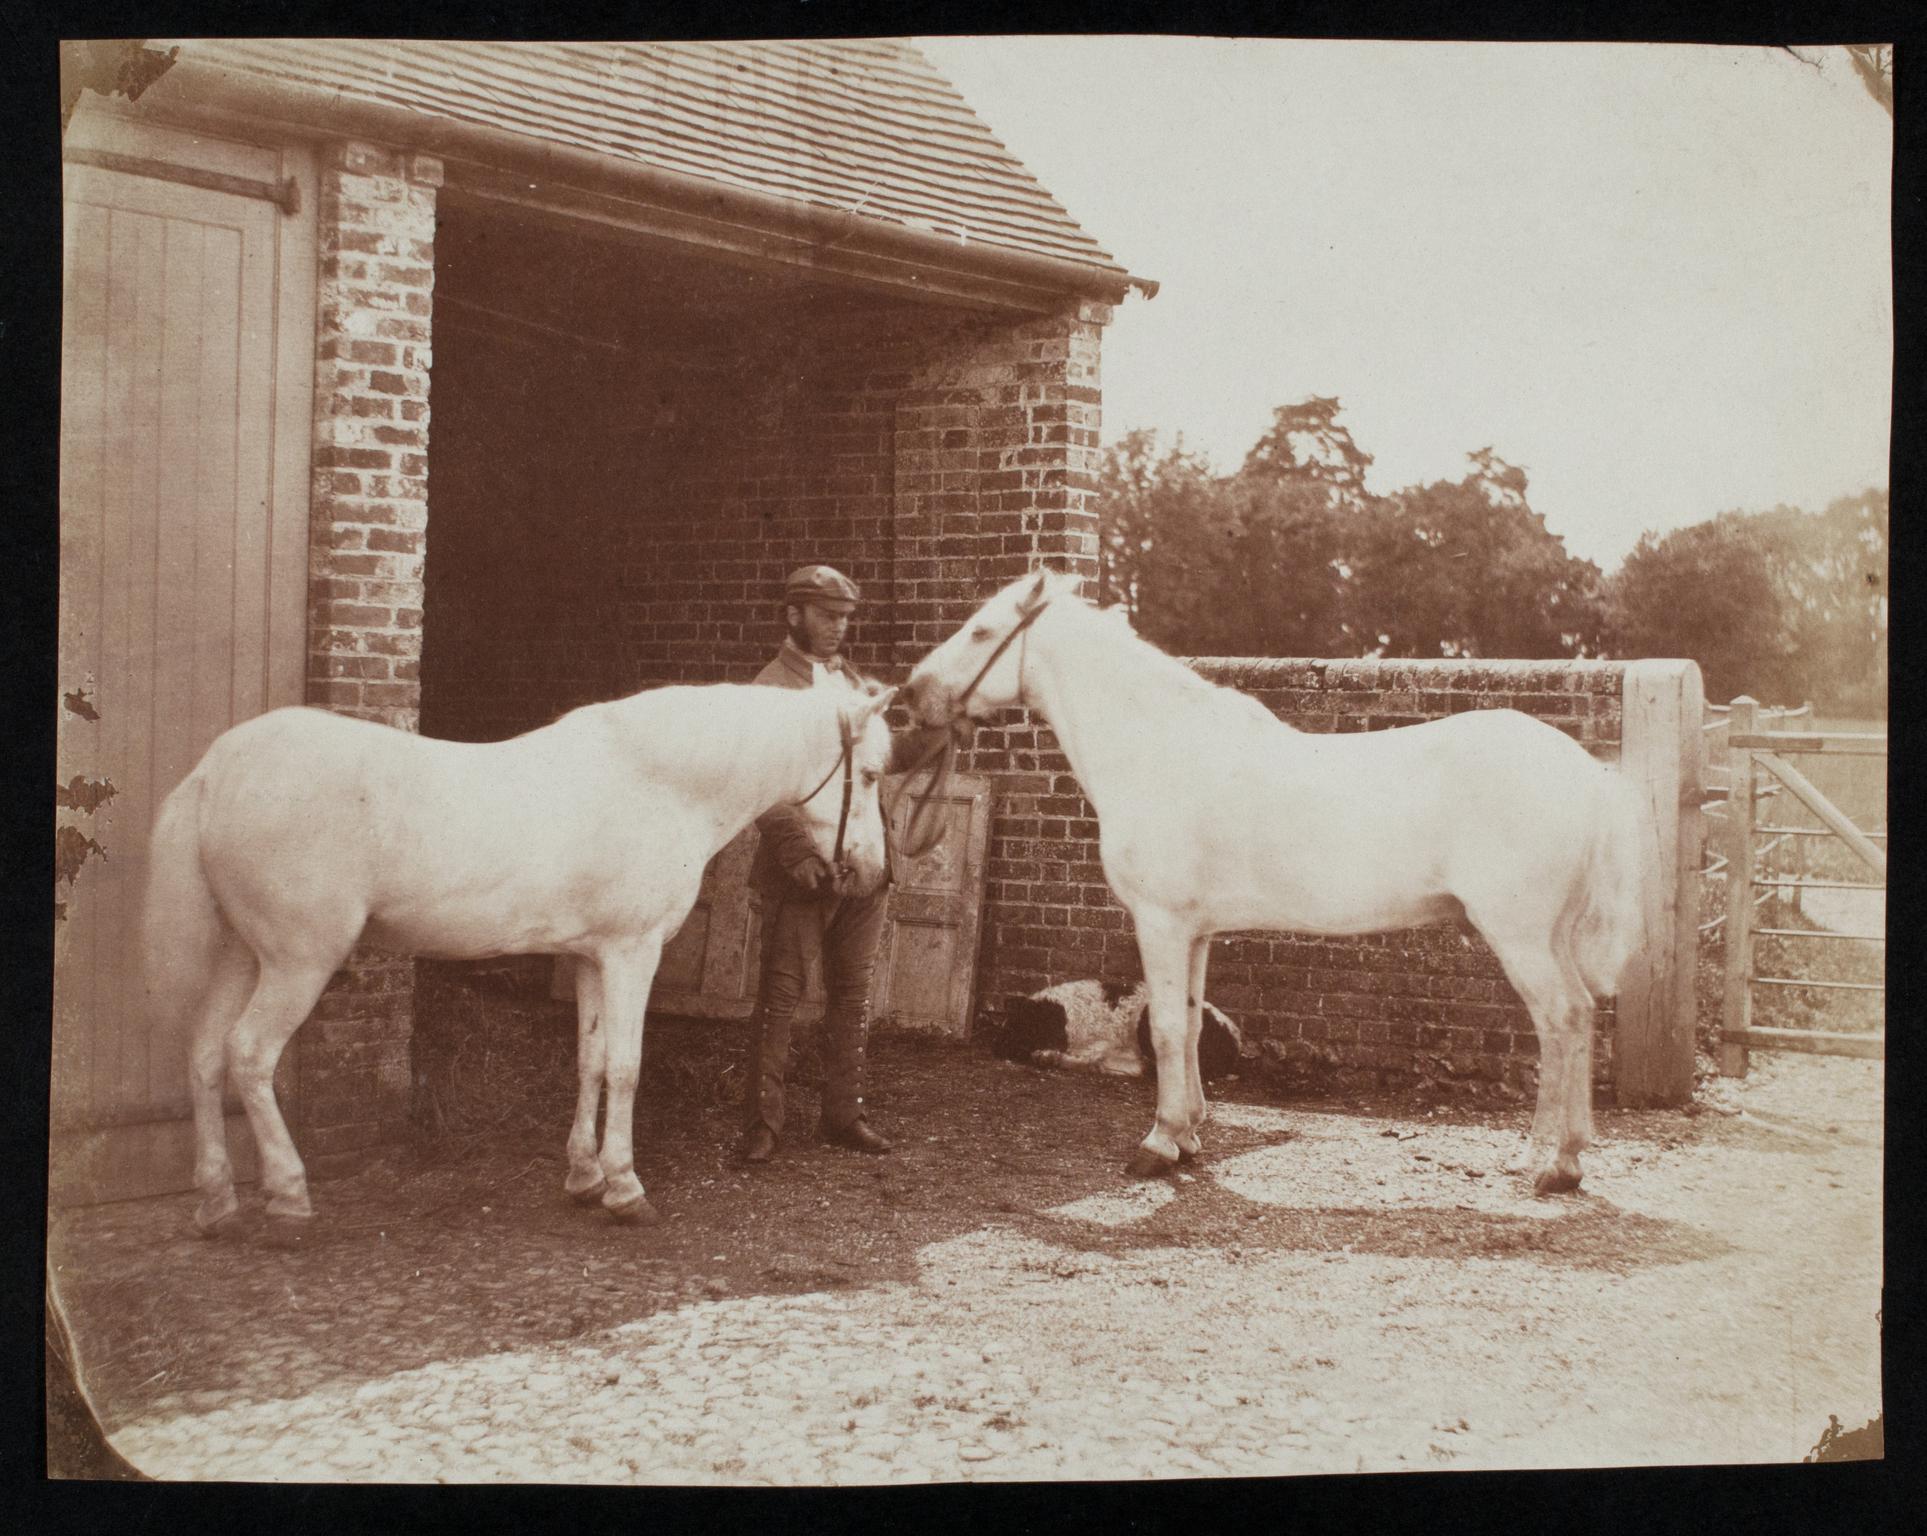 Groom with two white horses, photograph